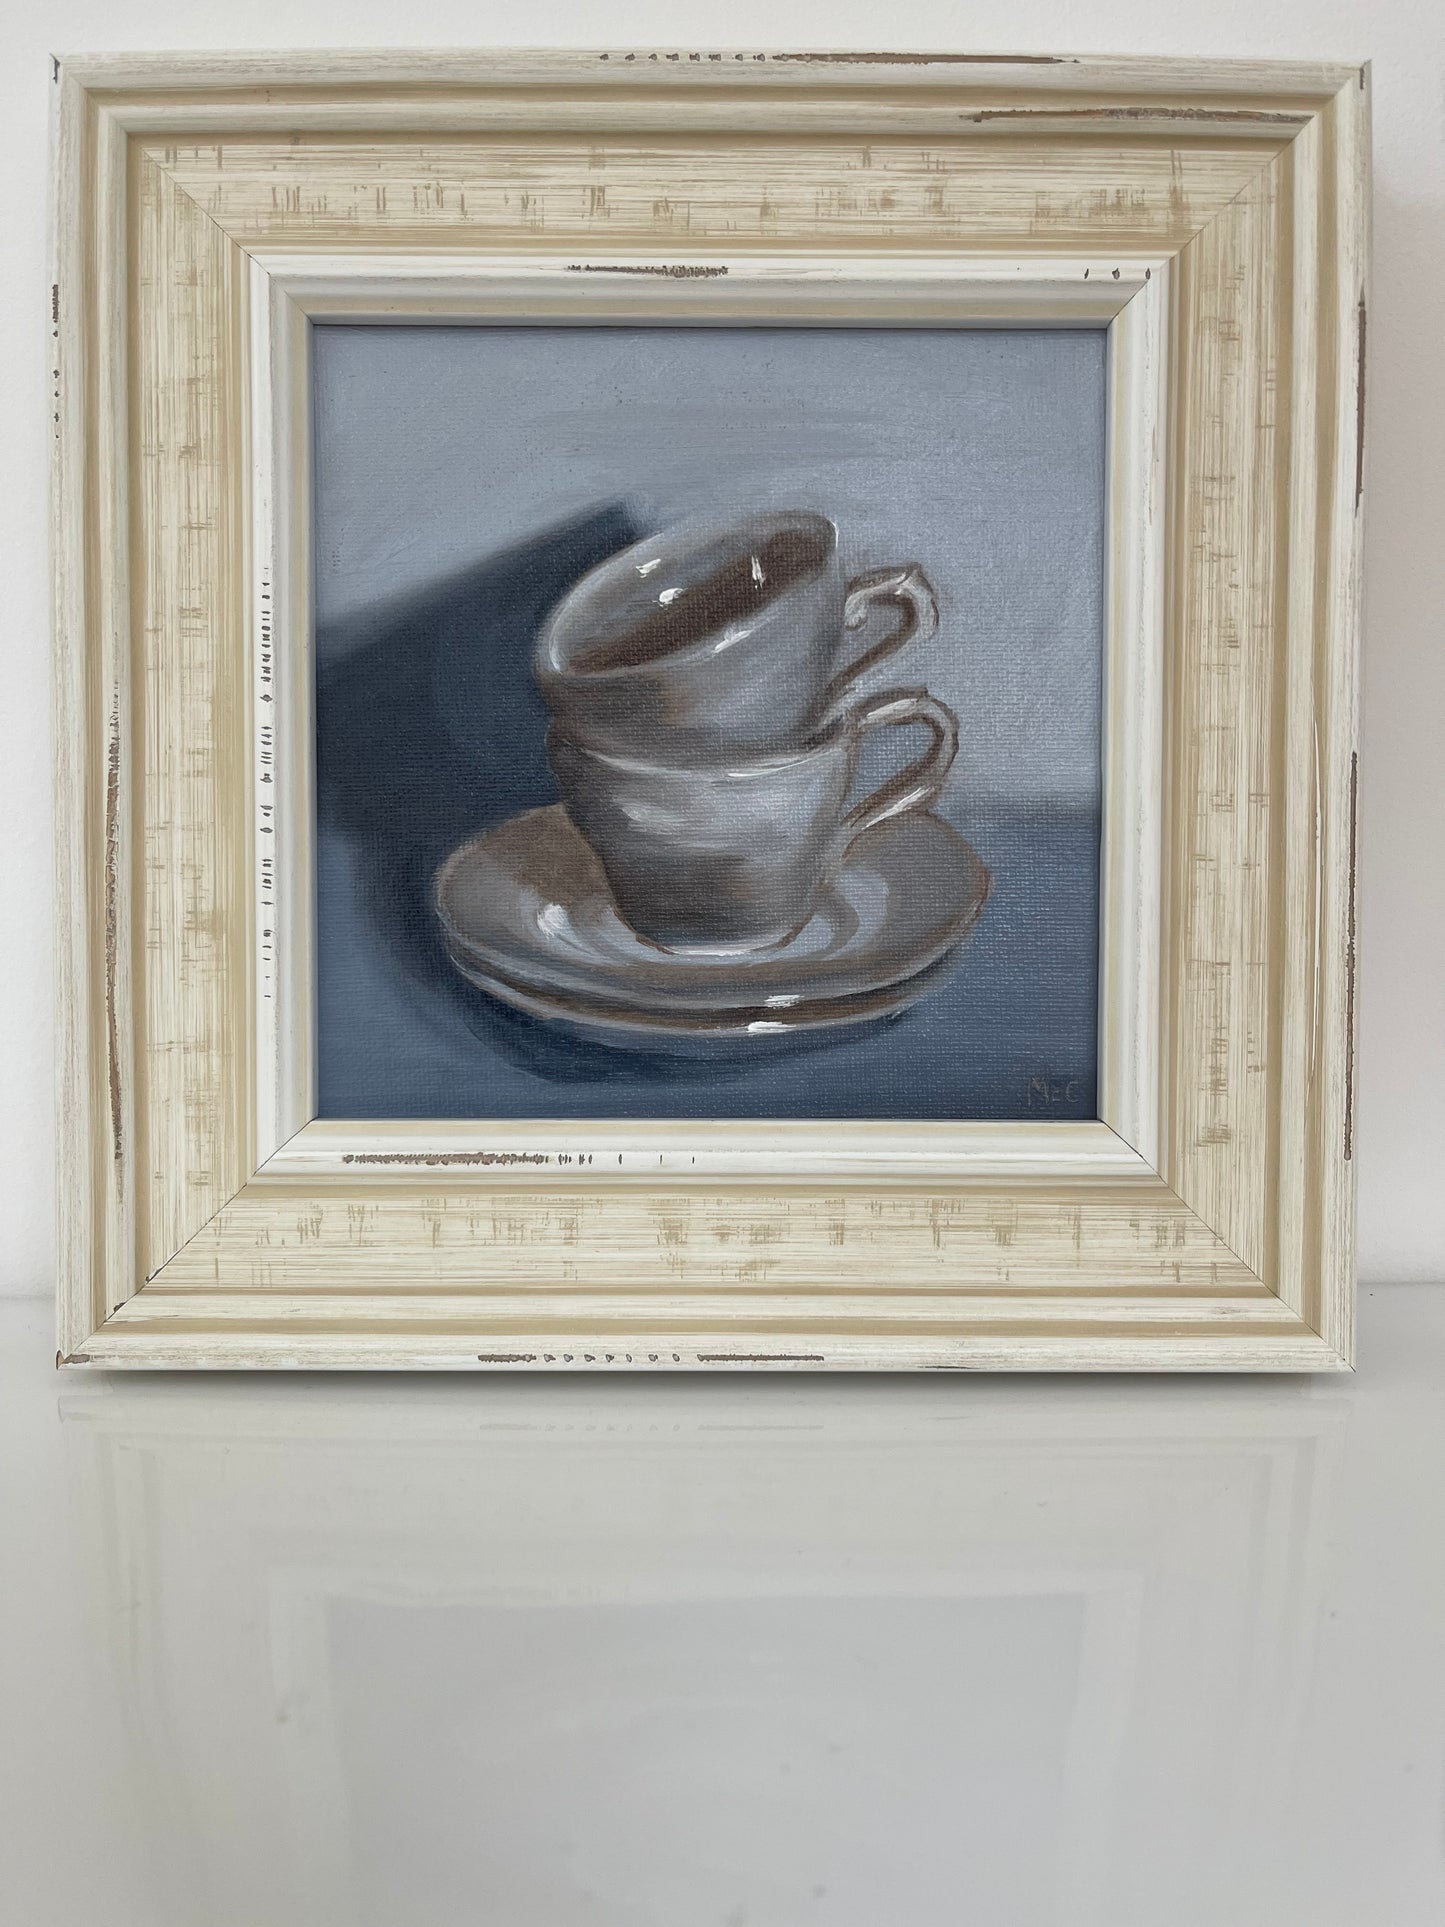 Stacked Cups Still Life | Original Oil Painting | 6 x 6 inches with optional frame